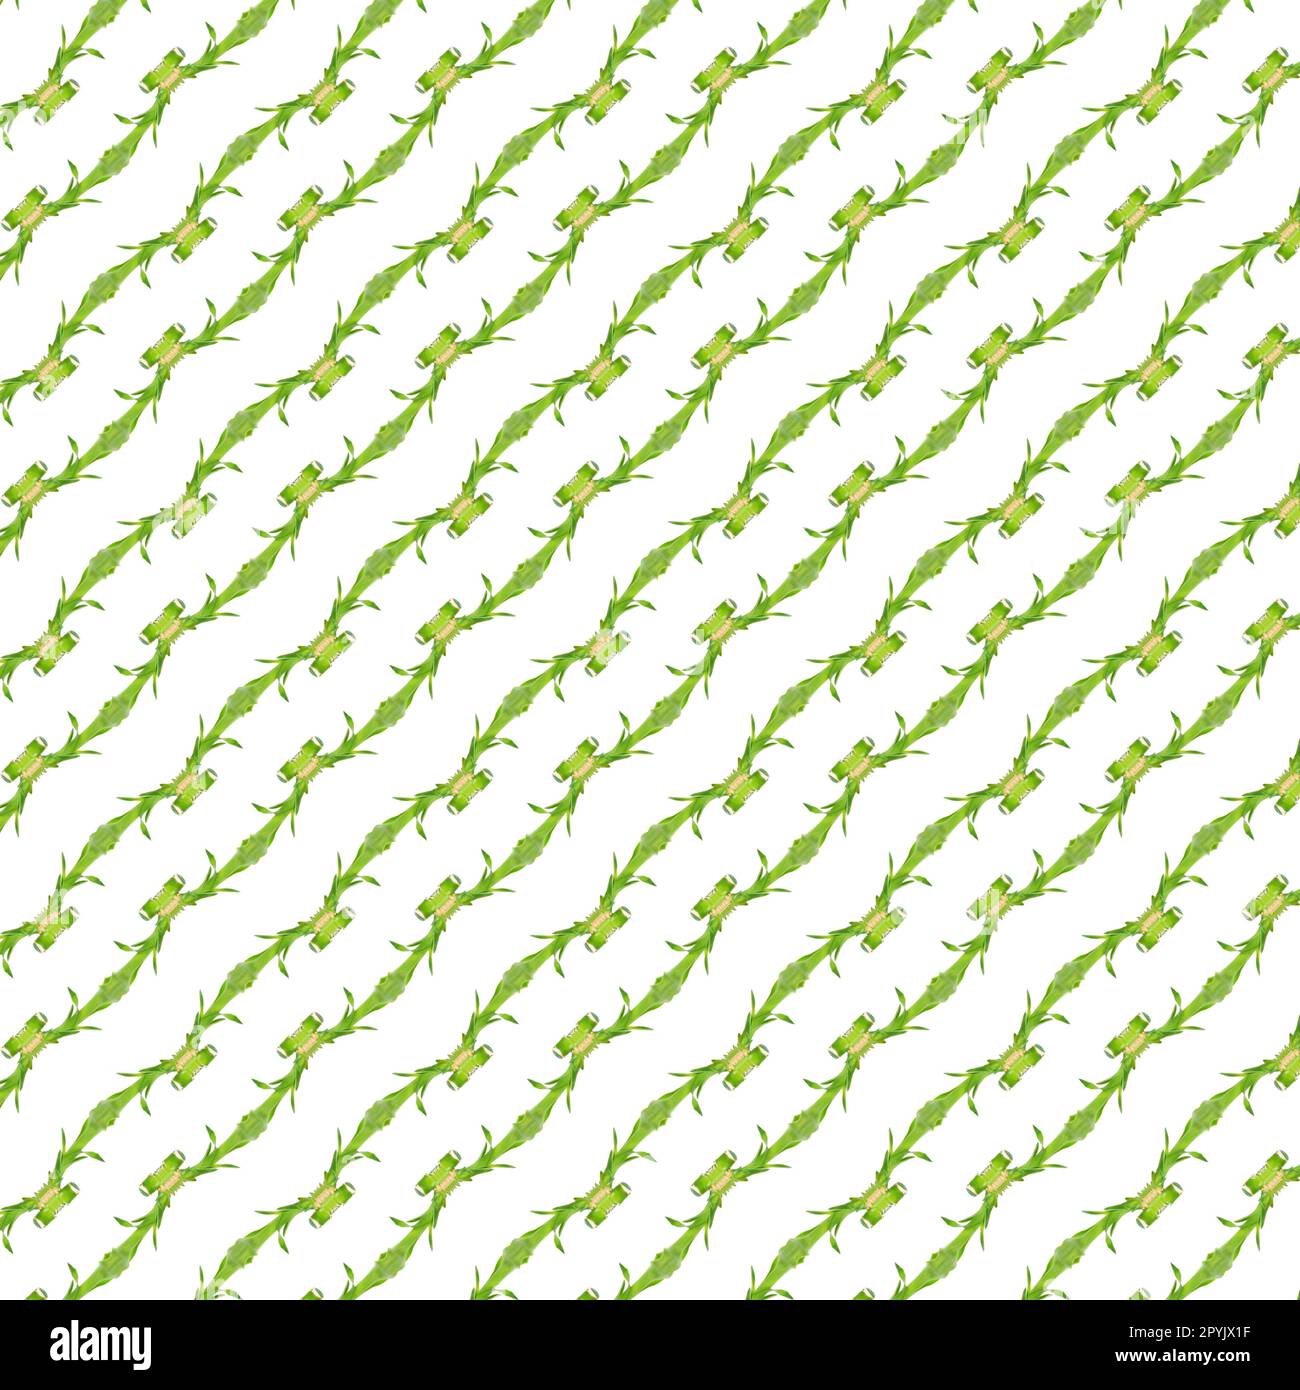 Abstract pattern of the green flora Stock Photo